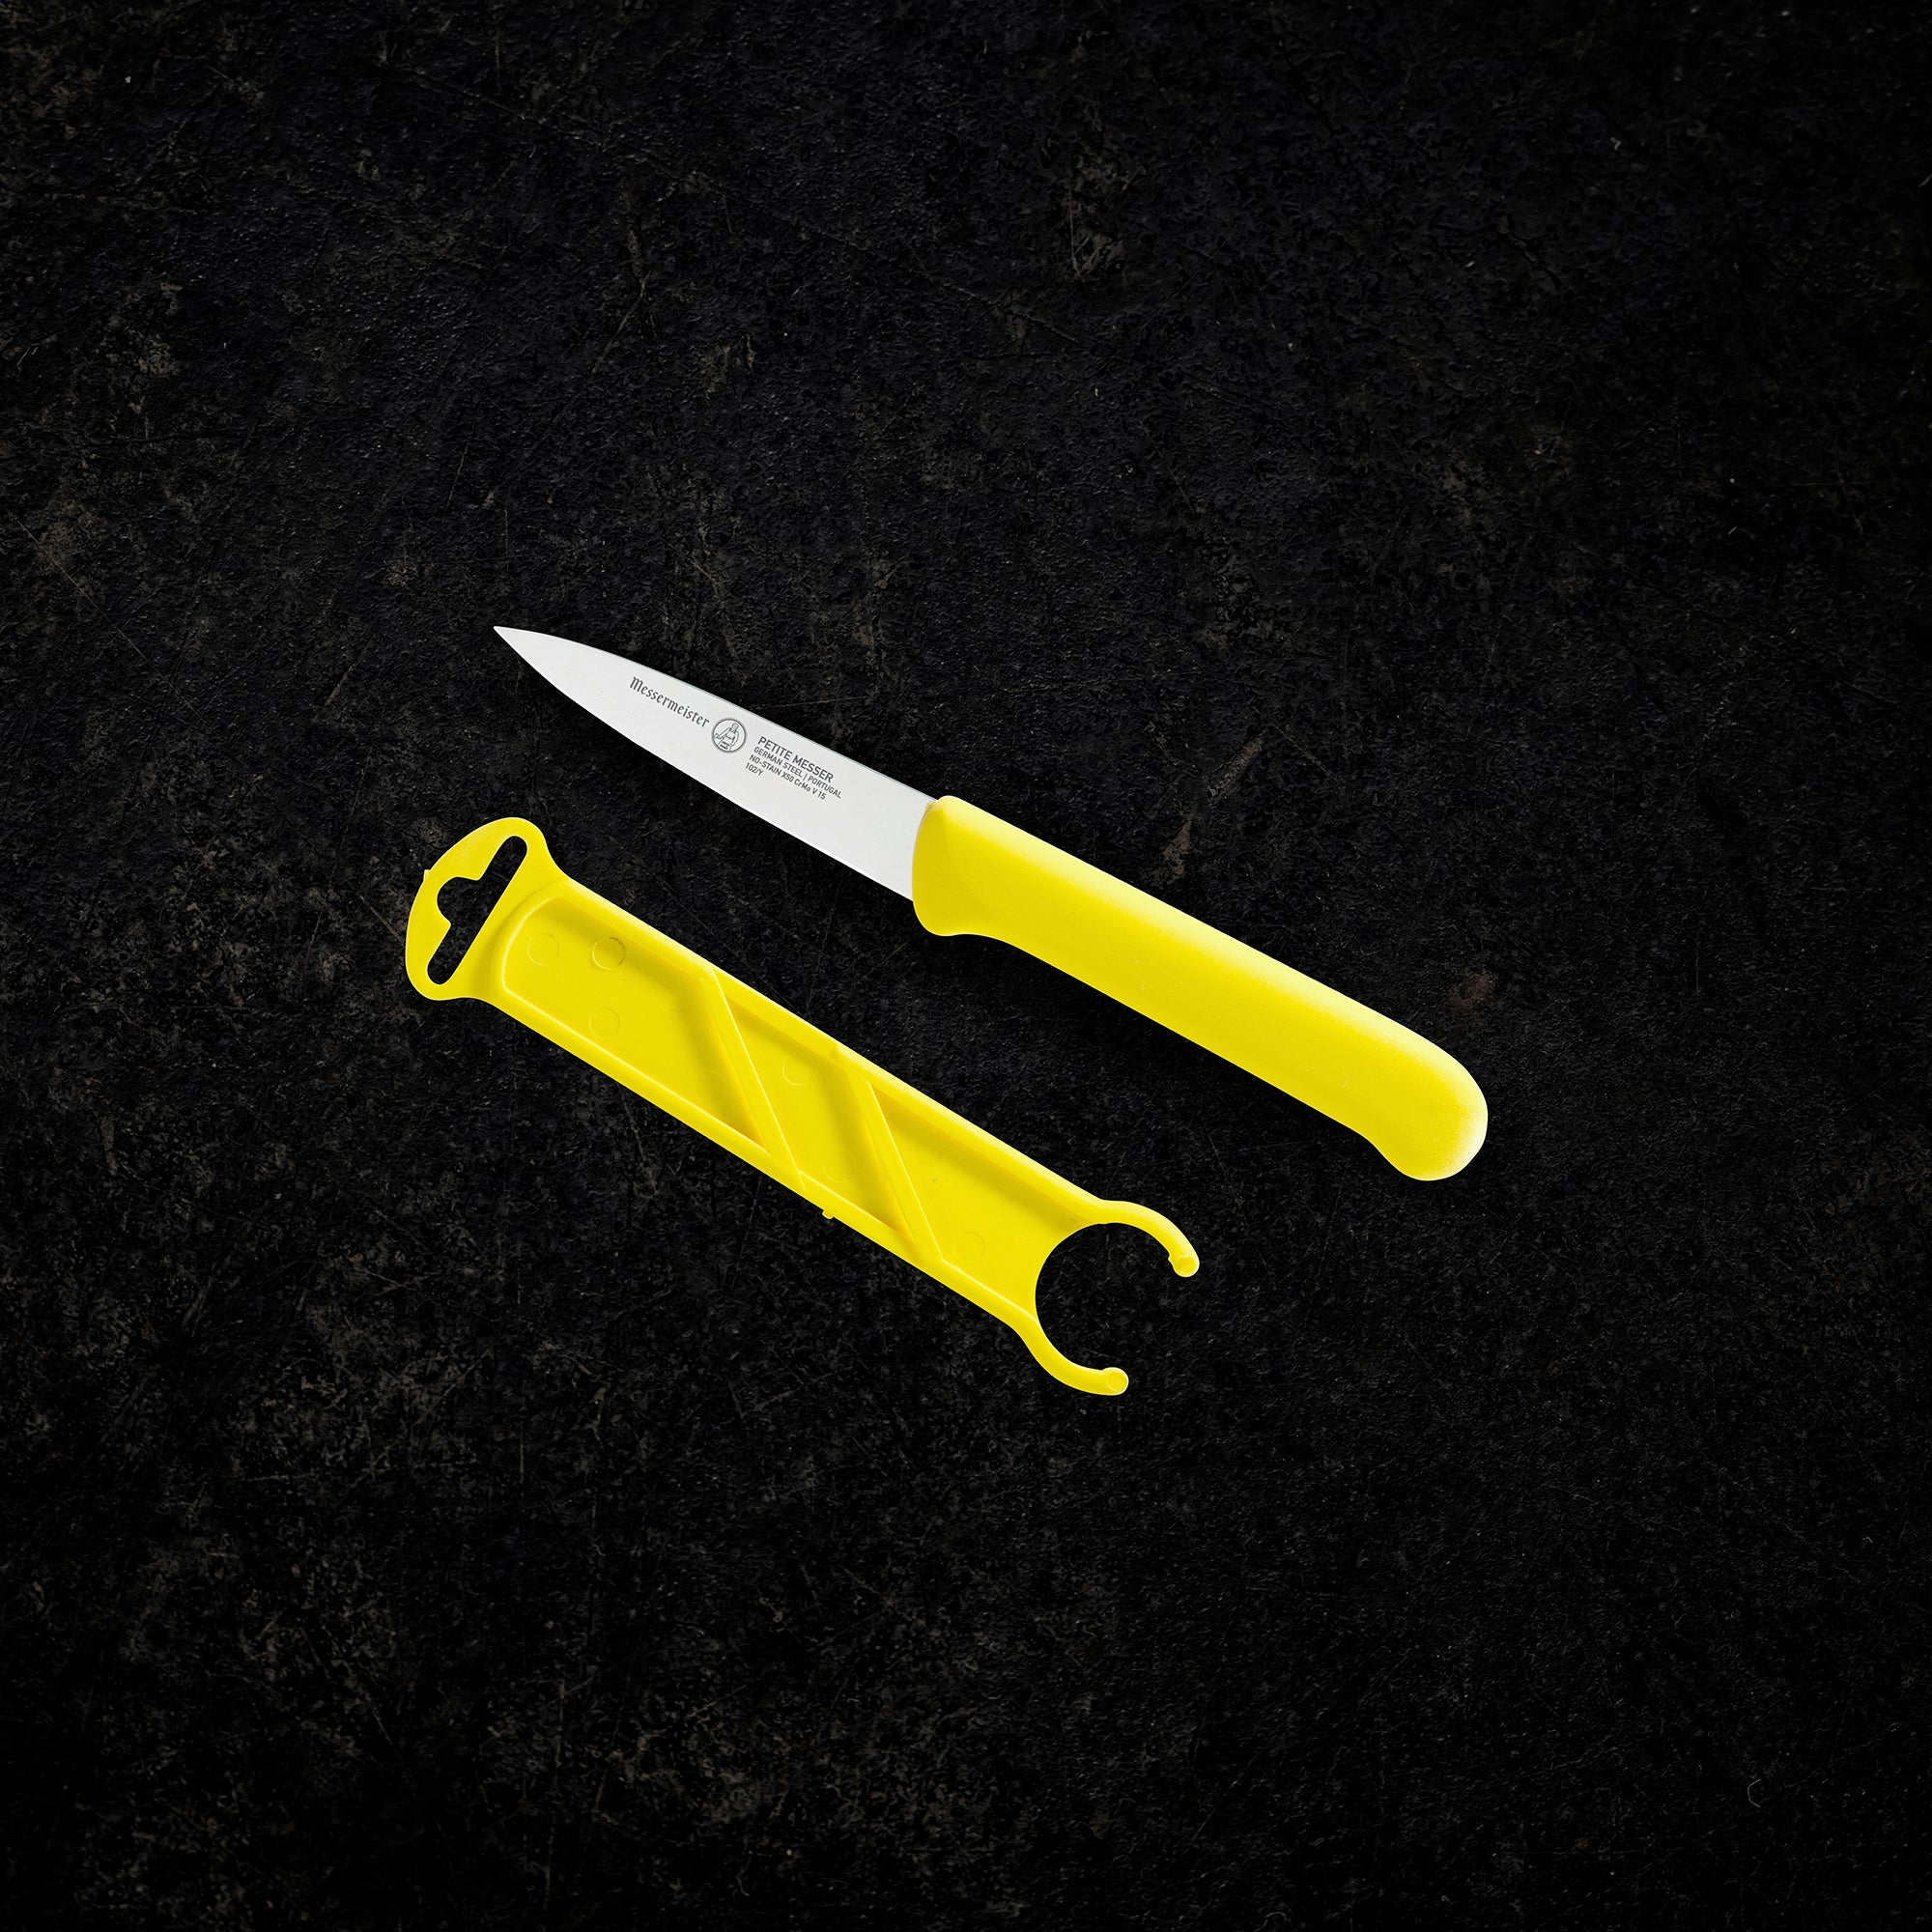 3 Inch Spear Point Parer with Matching Sheath - Yellow